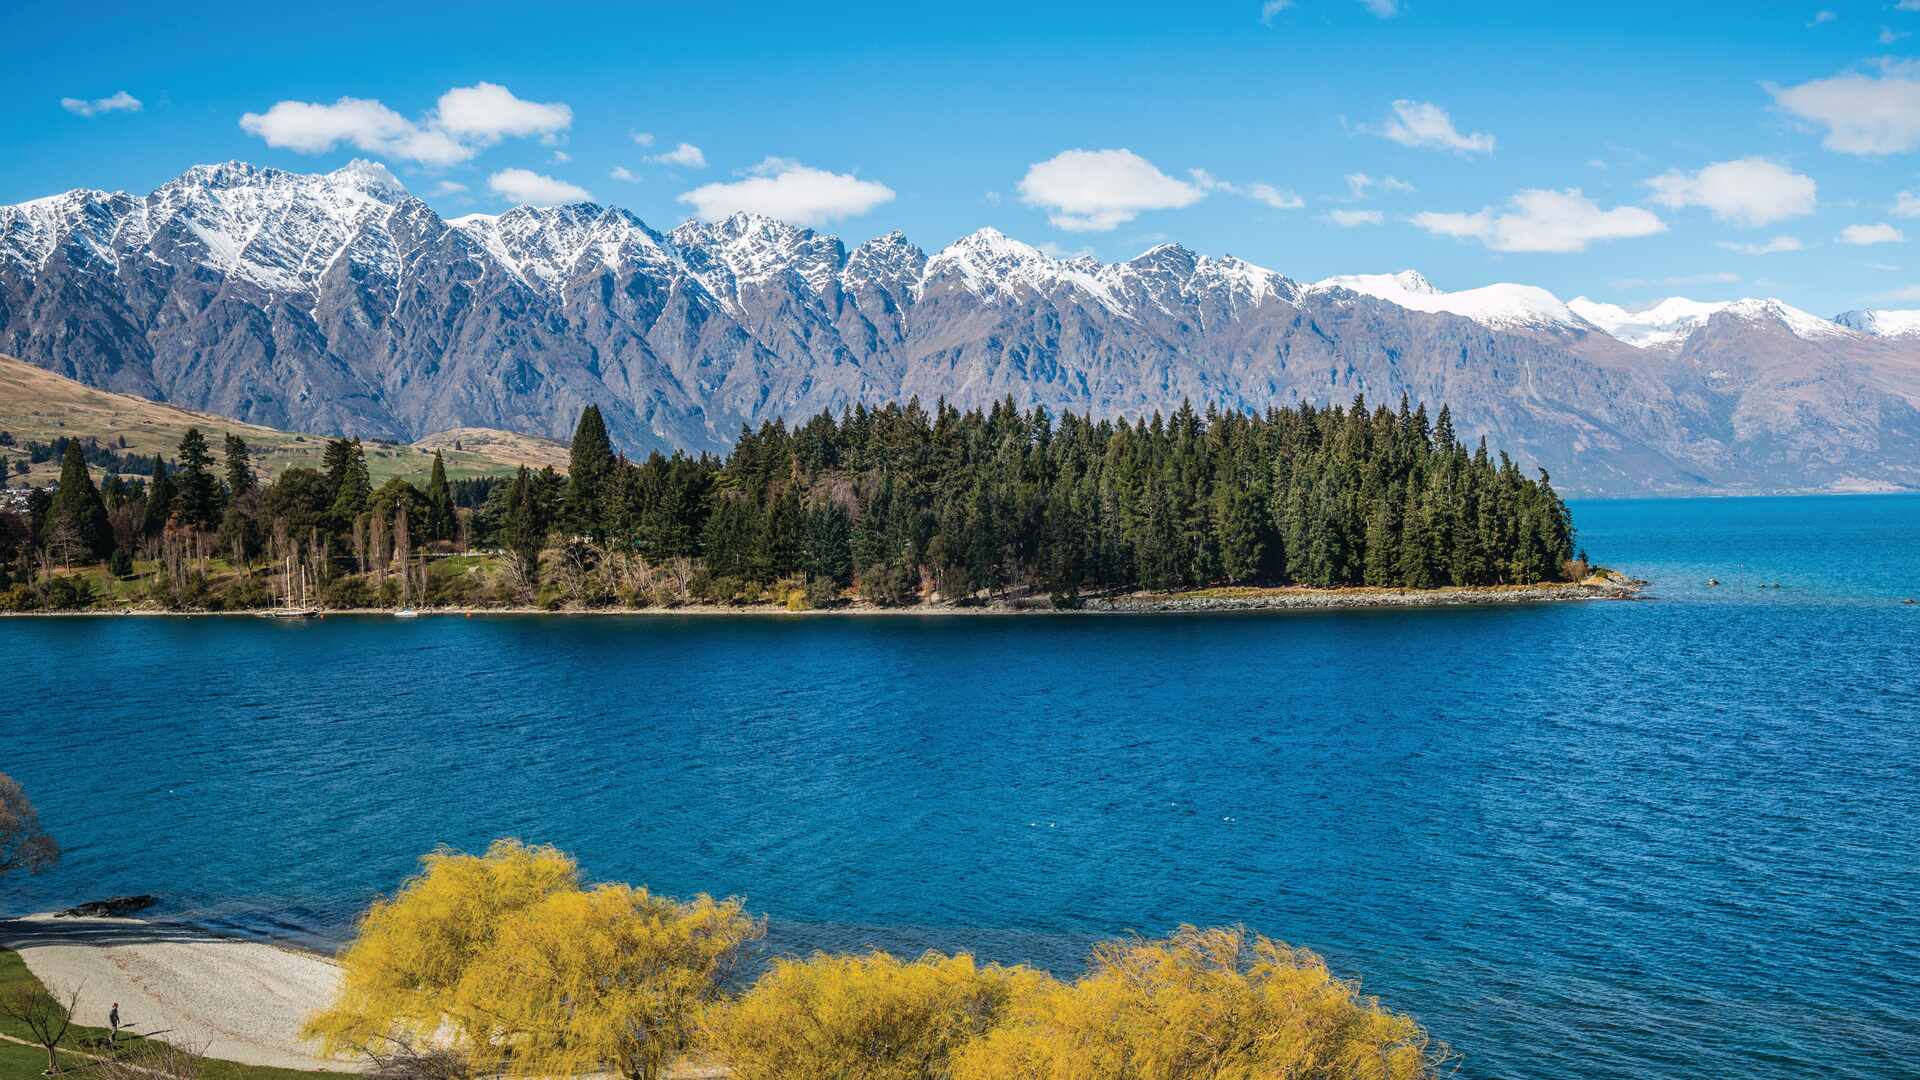 Queenstown Lake Wakatipu The Remarkables